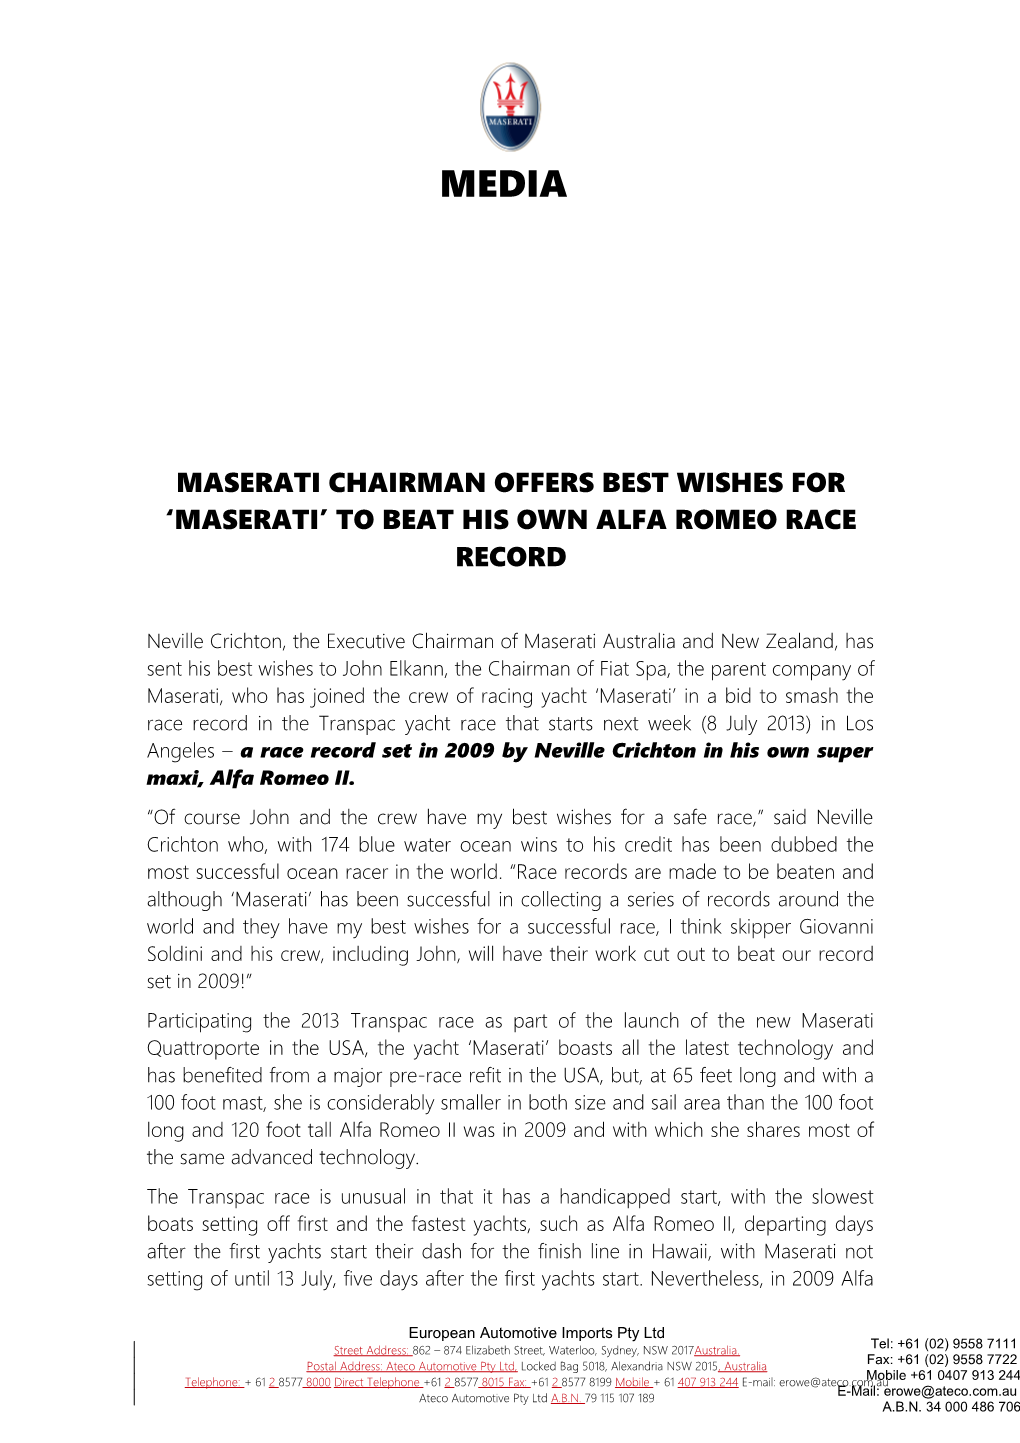 Maserati Chairman Offers Best Wishes for Maserati to Beat His Own Alfa Romeo Race Record